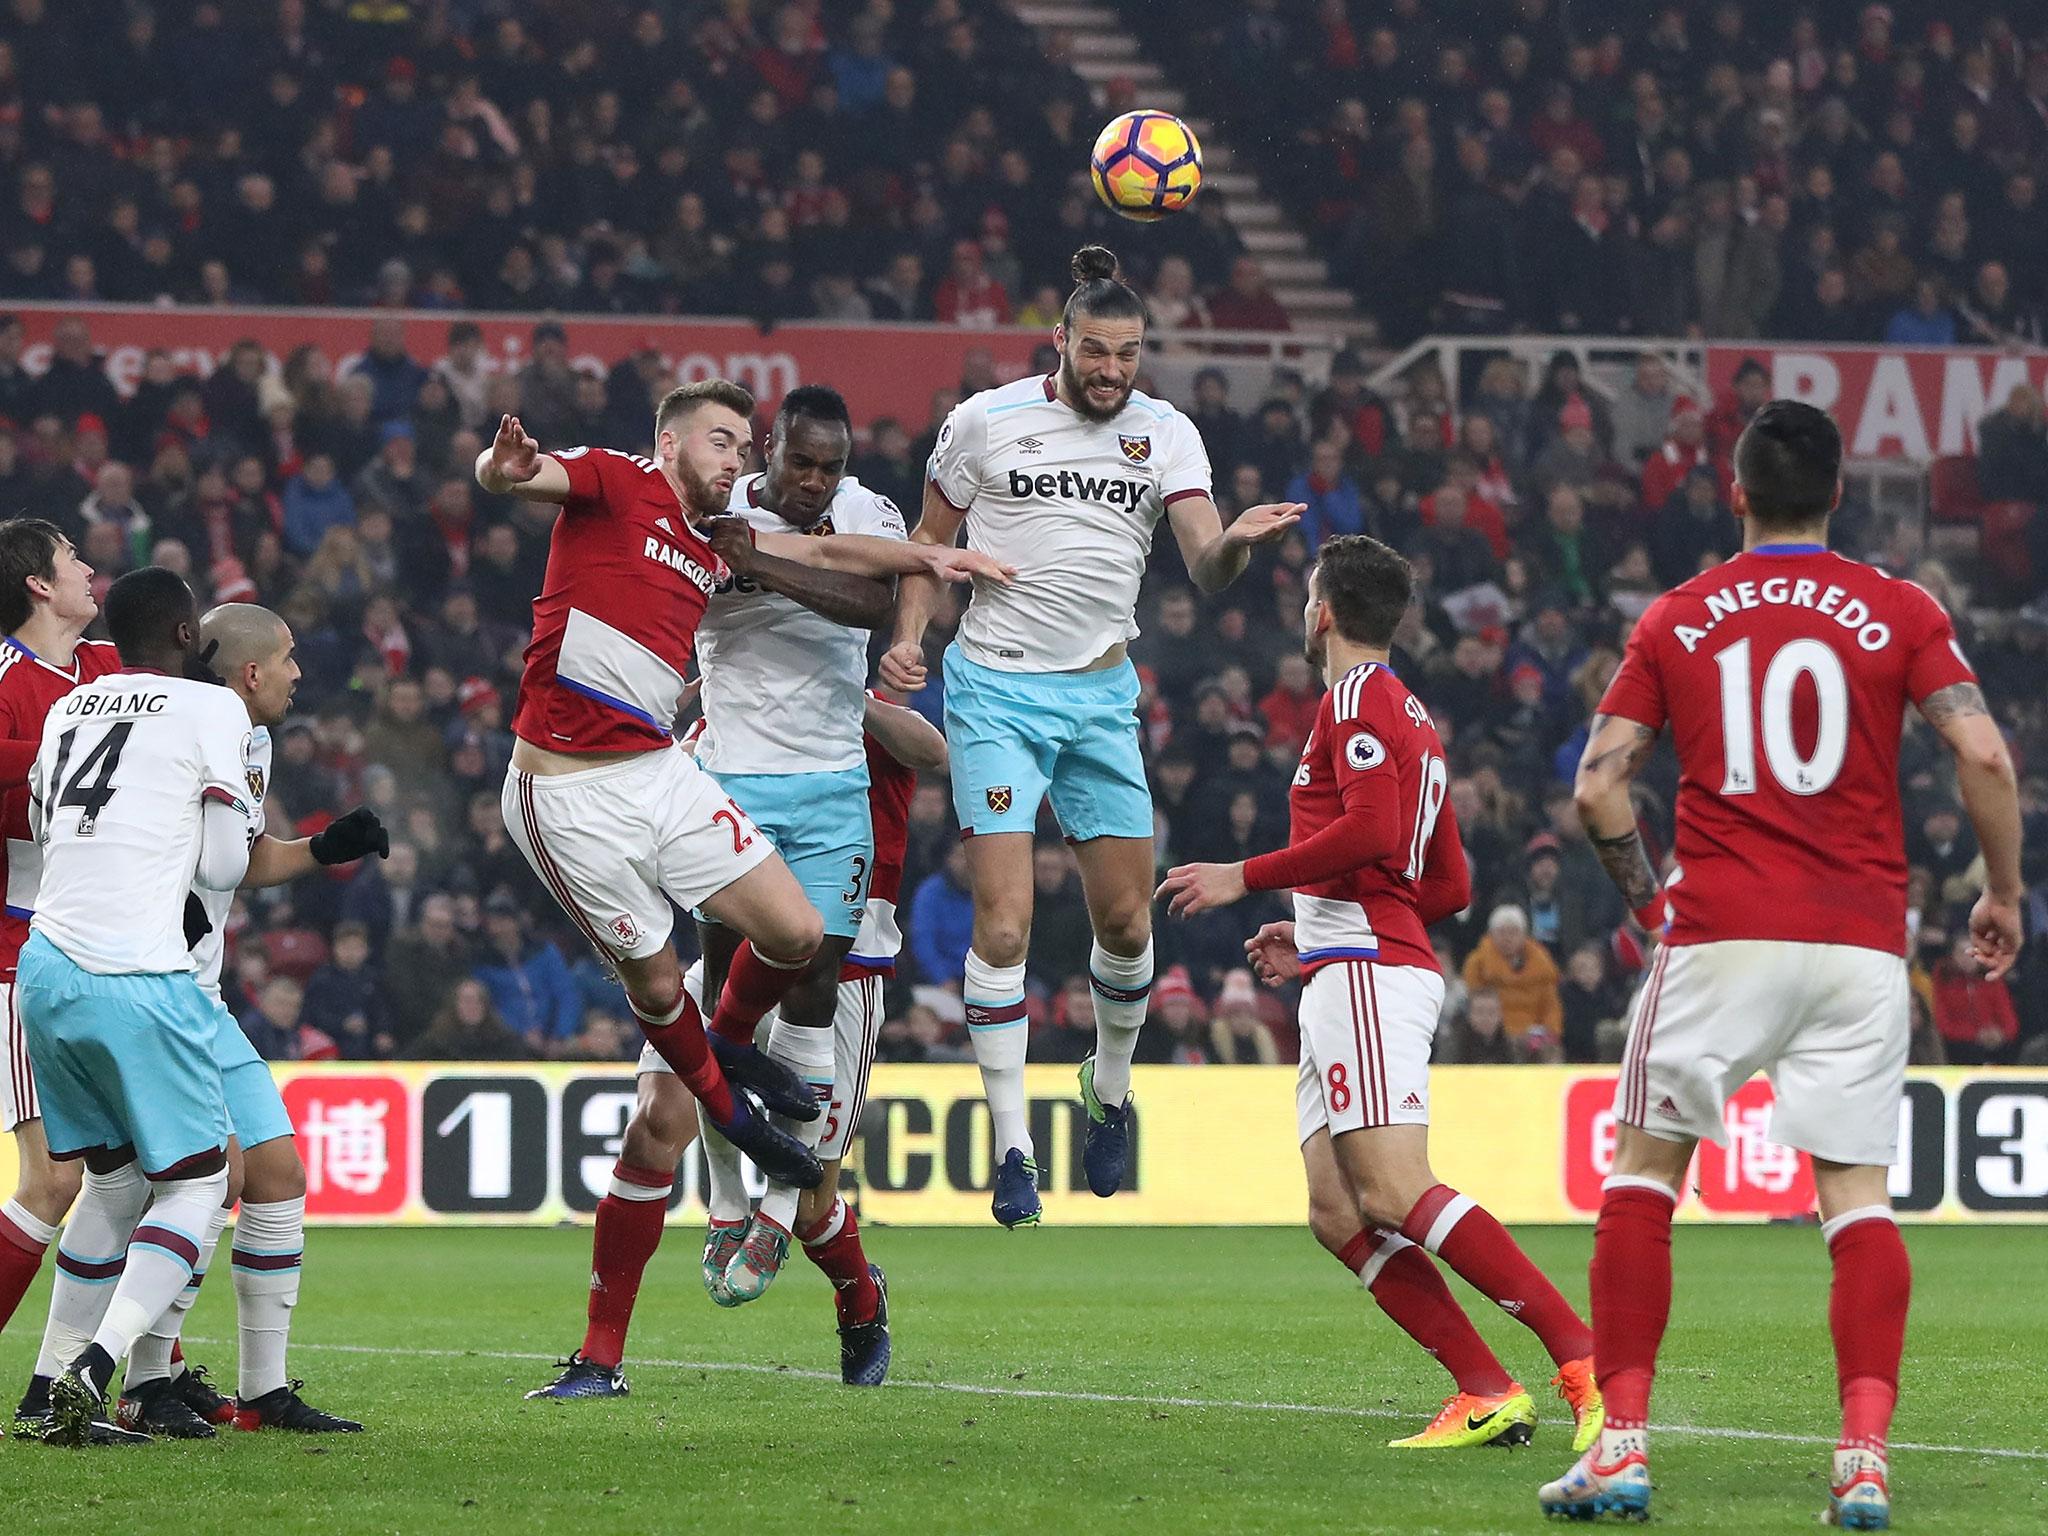 Andy Carroll heads West Ham into the lead against Middlesbrough